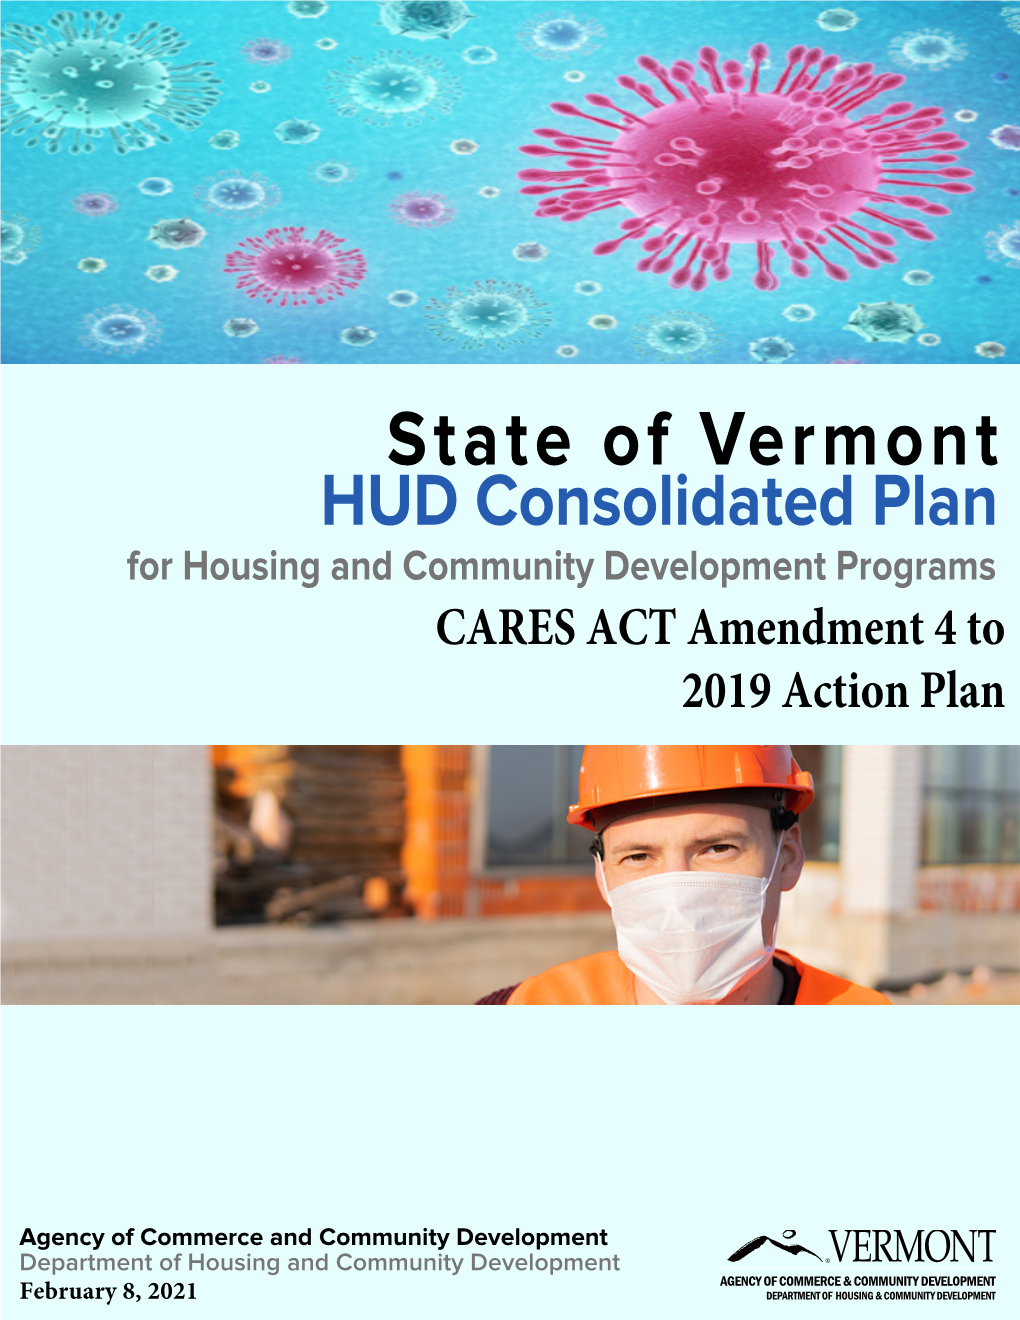 State of Vermont HUD Consolidated Plan for Housing and Community Development Programs CARES ACT Amendment 4 to 2019 Action Plan